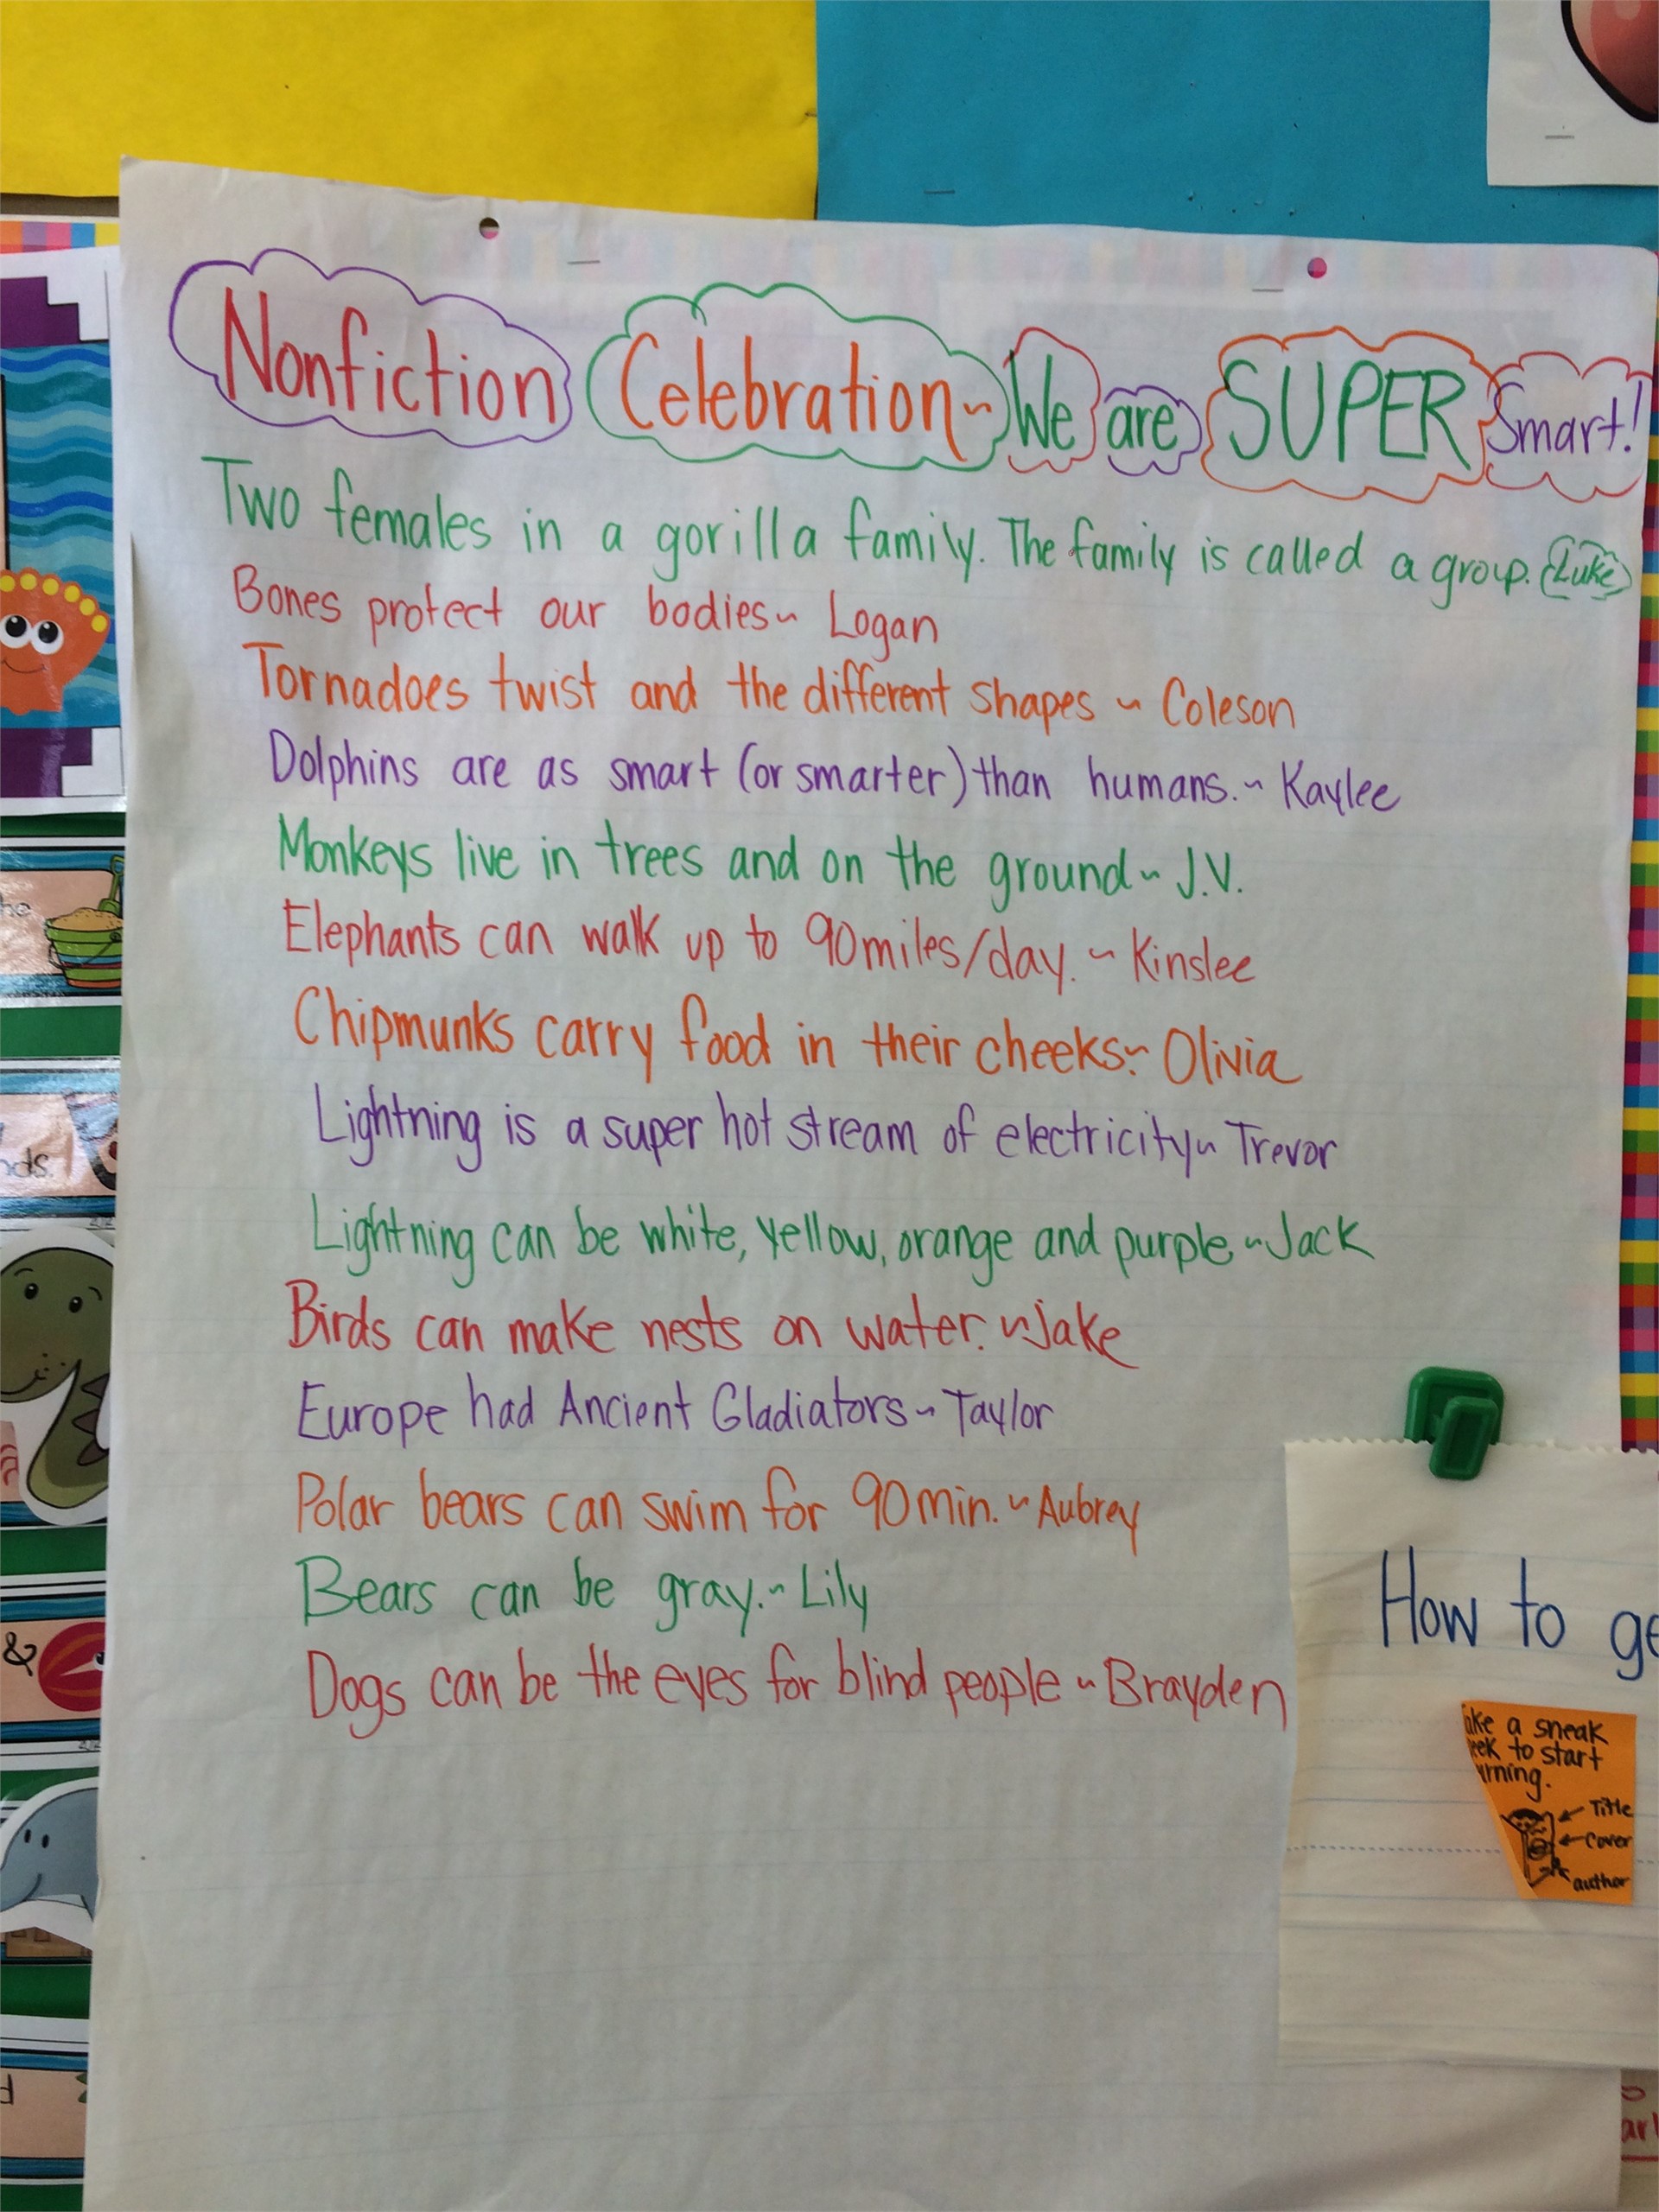 We can learn so much from nonfiction reading!